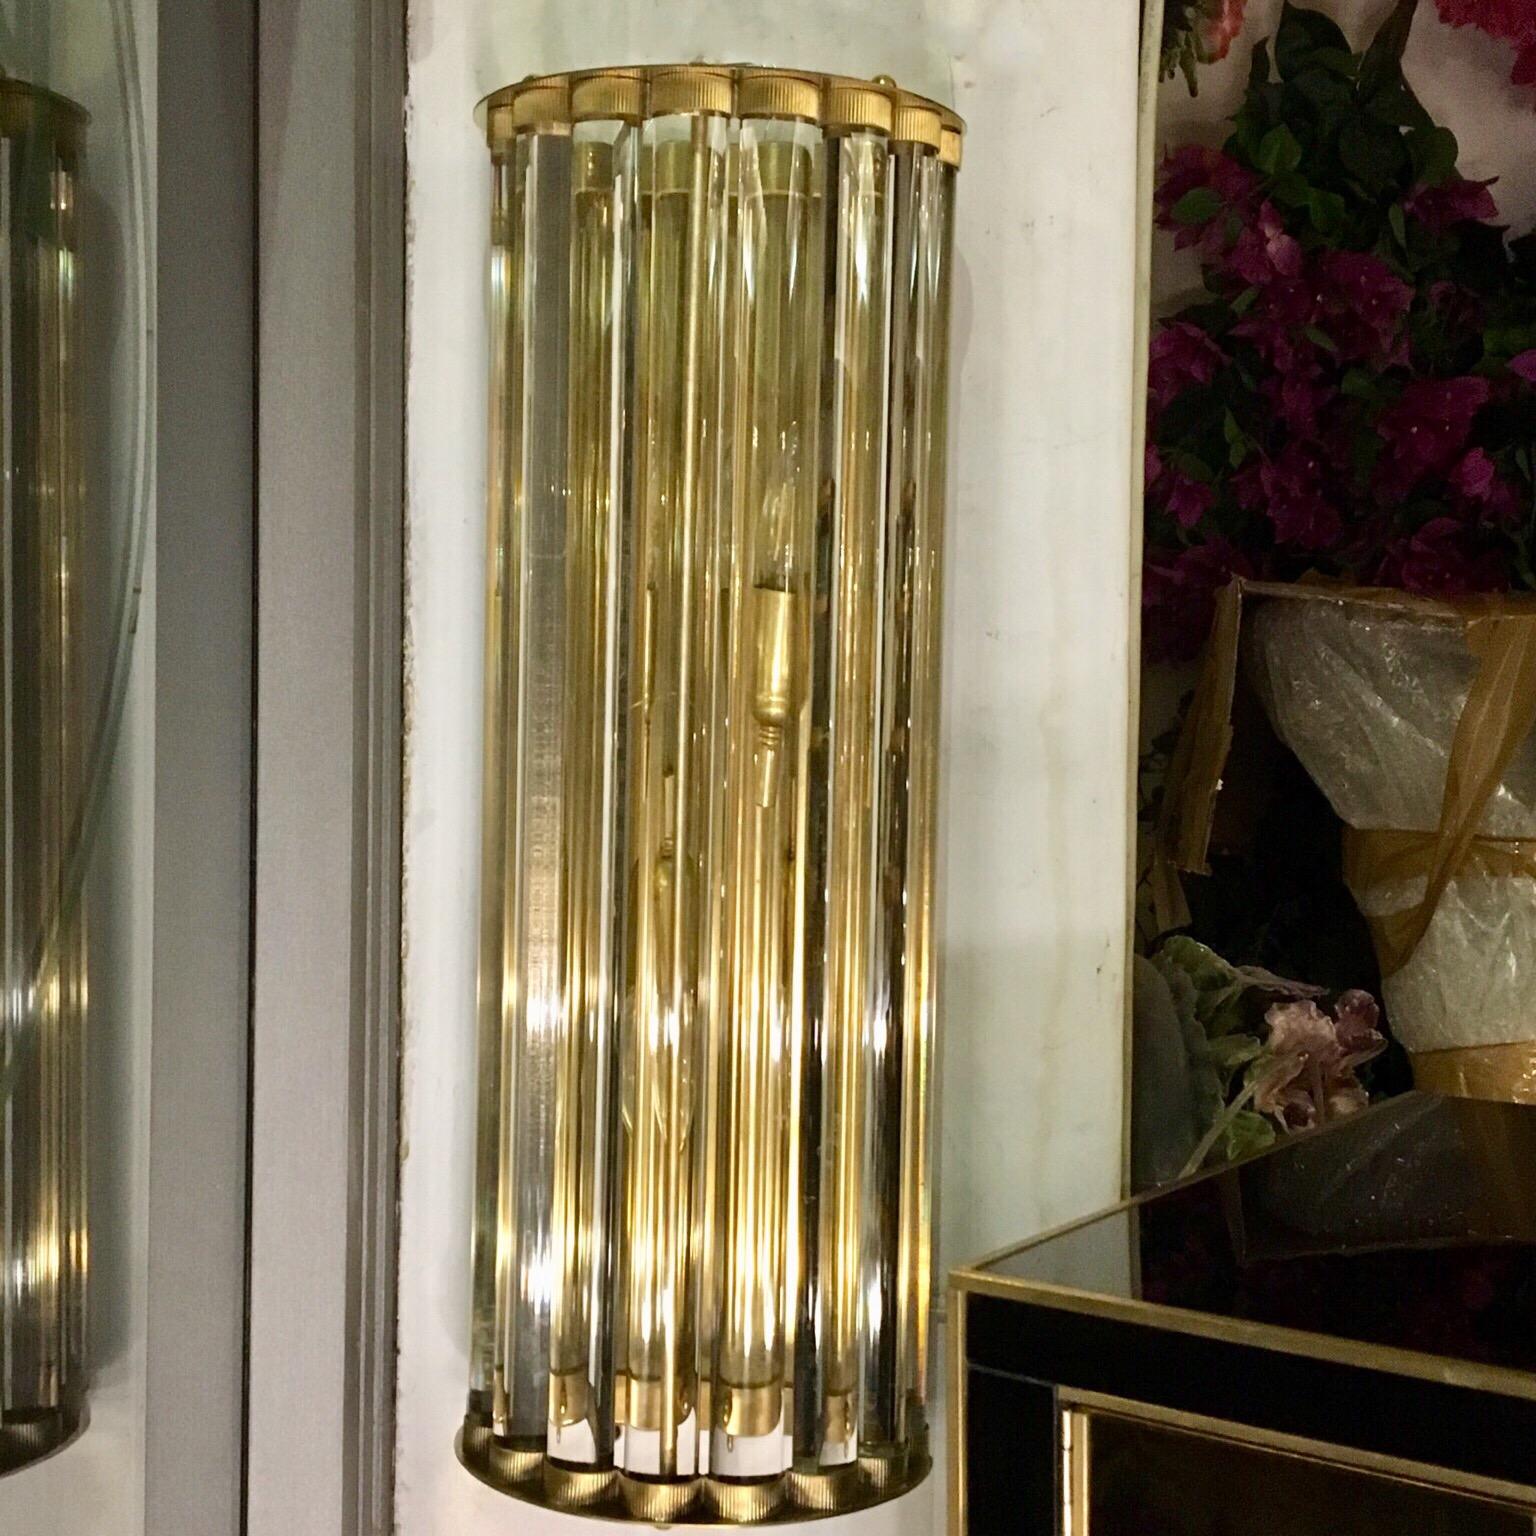 Pair of Murano clear glass wall sconces, half-round structure with hand blown transparent glass elements that are multiplying the light effect, brass structure. They can be positioned both horizontally and vertically, two bulbs per sconces, new